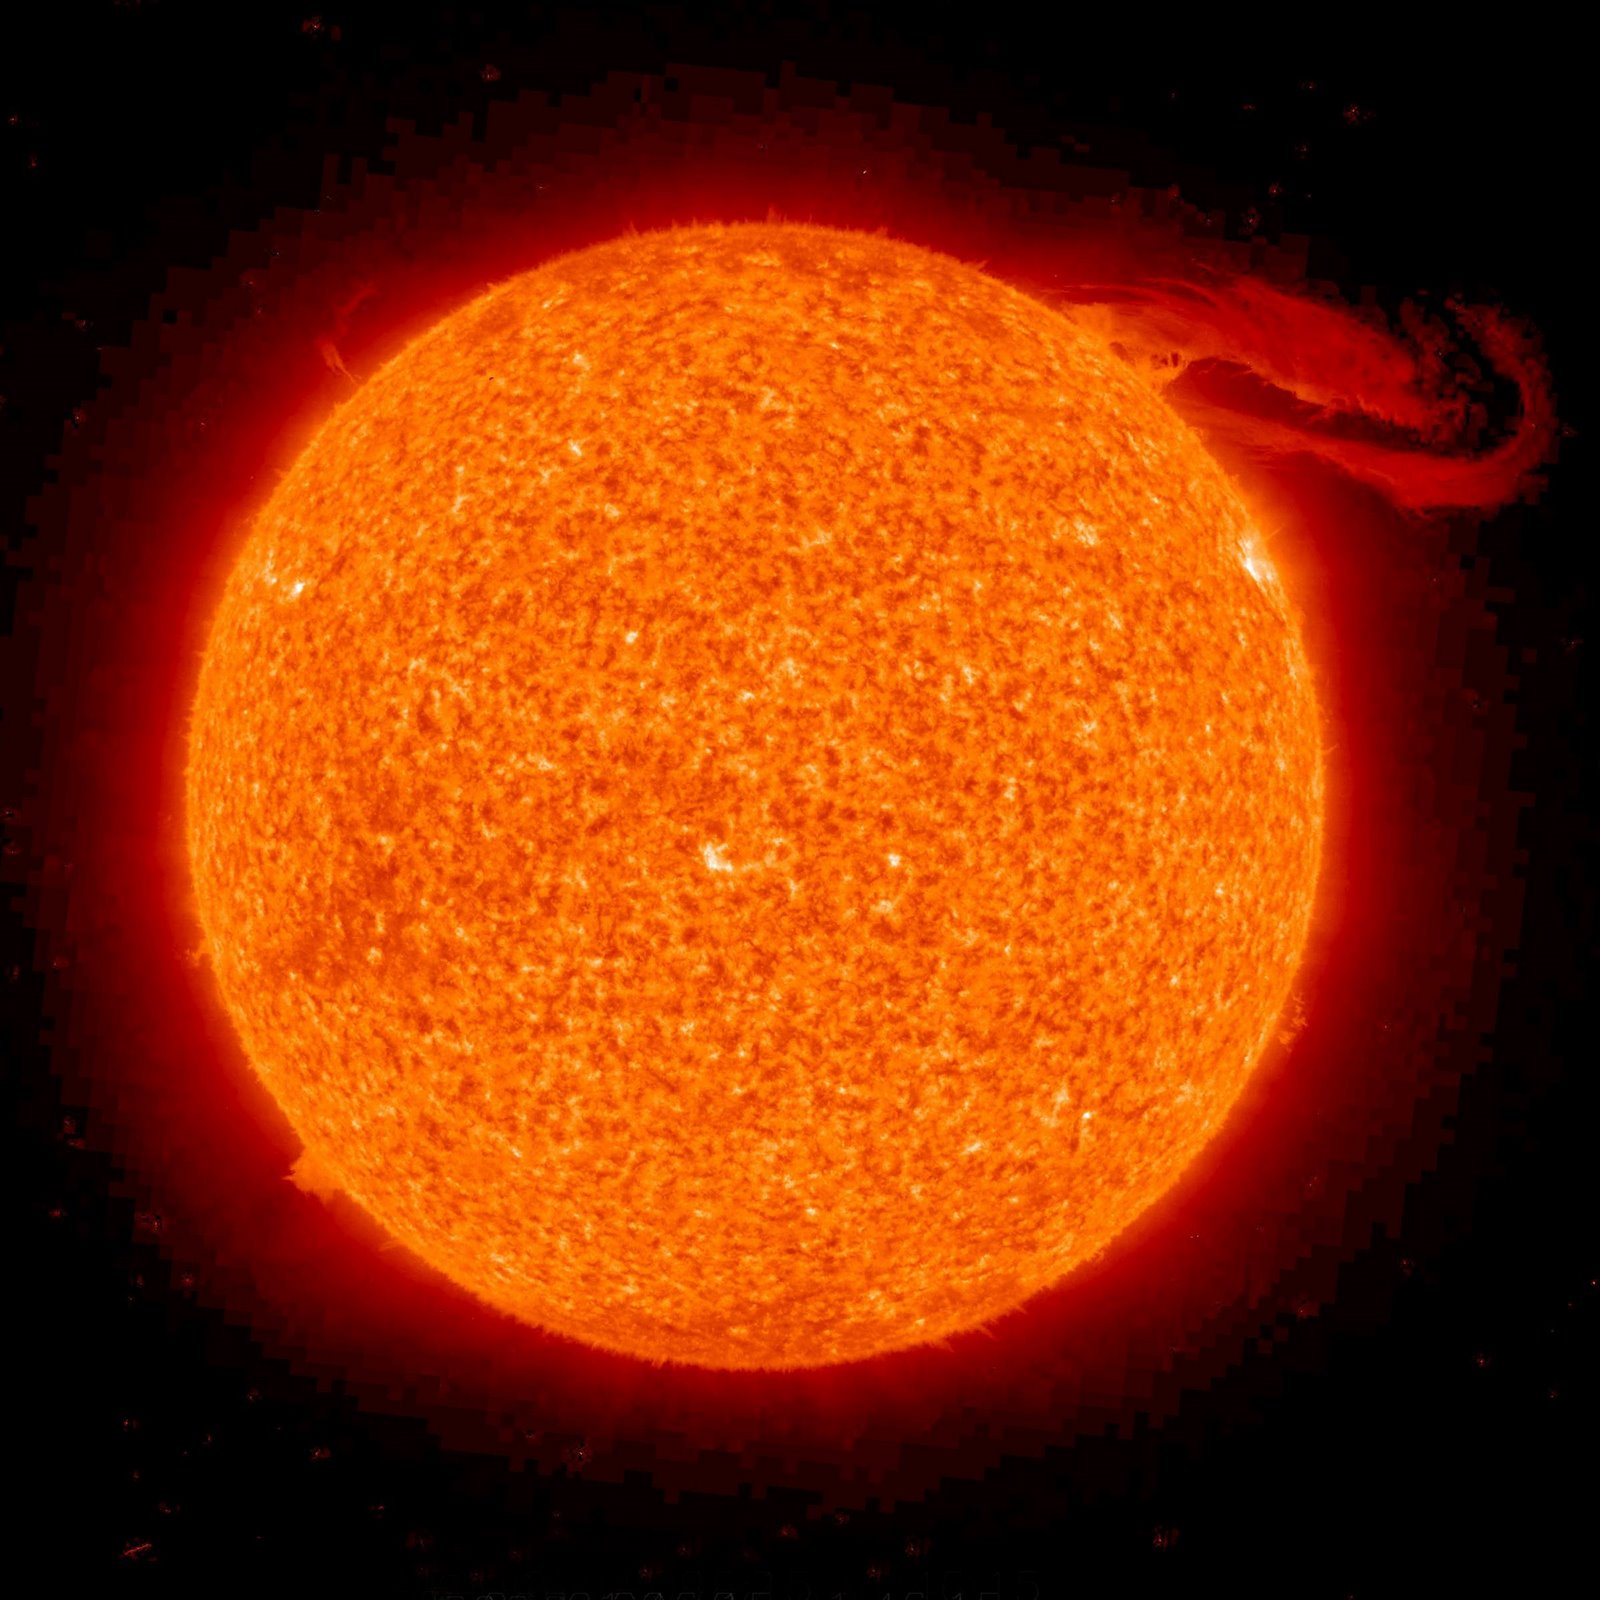 CLOSE-UP PHOTO - "SOLAR PROMINENCE